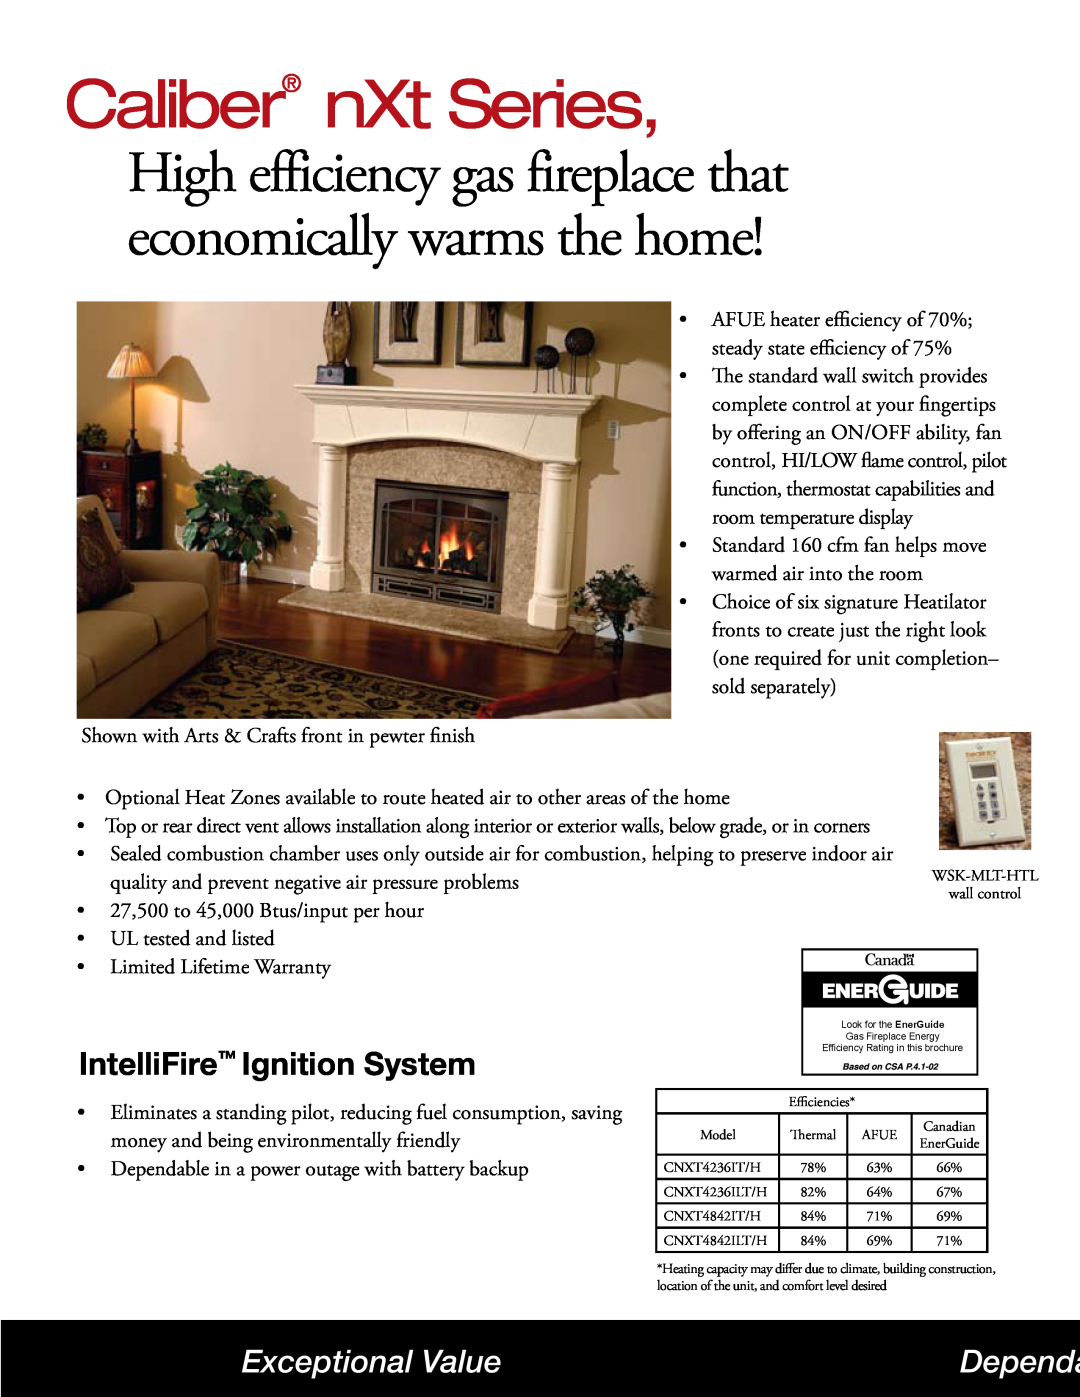 Hearth and Home Technologies CNXT4236IT/H Exceptional Value, Caliber nXt Series, IntelliFire Ignition System, Dependa 